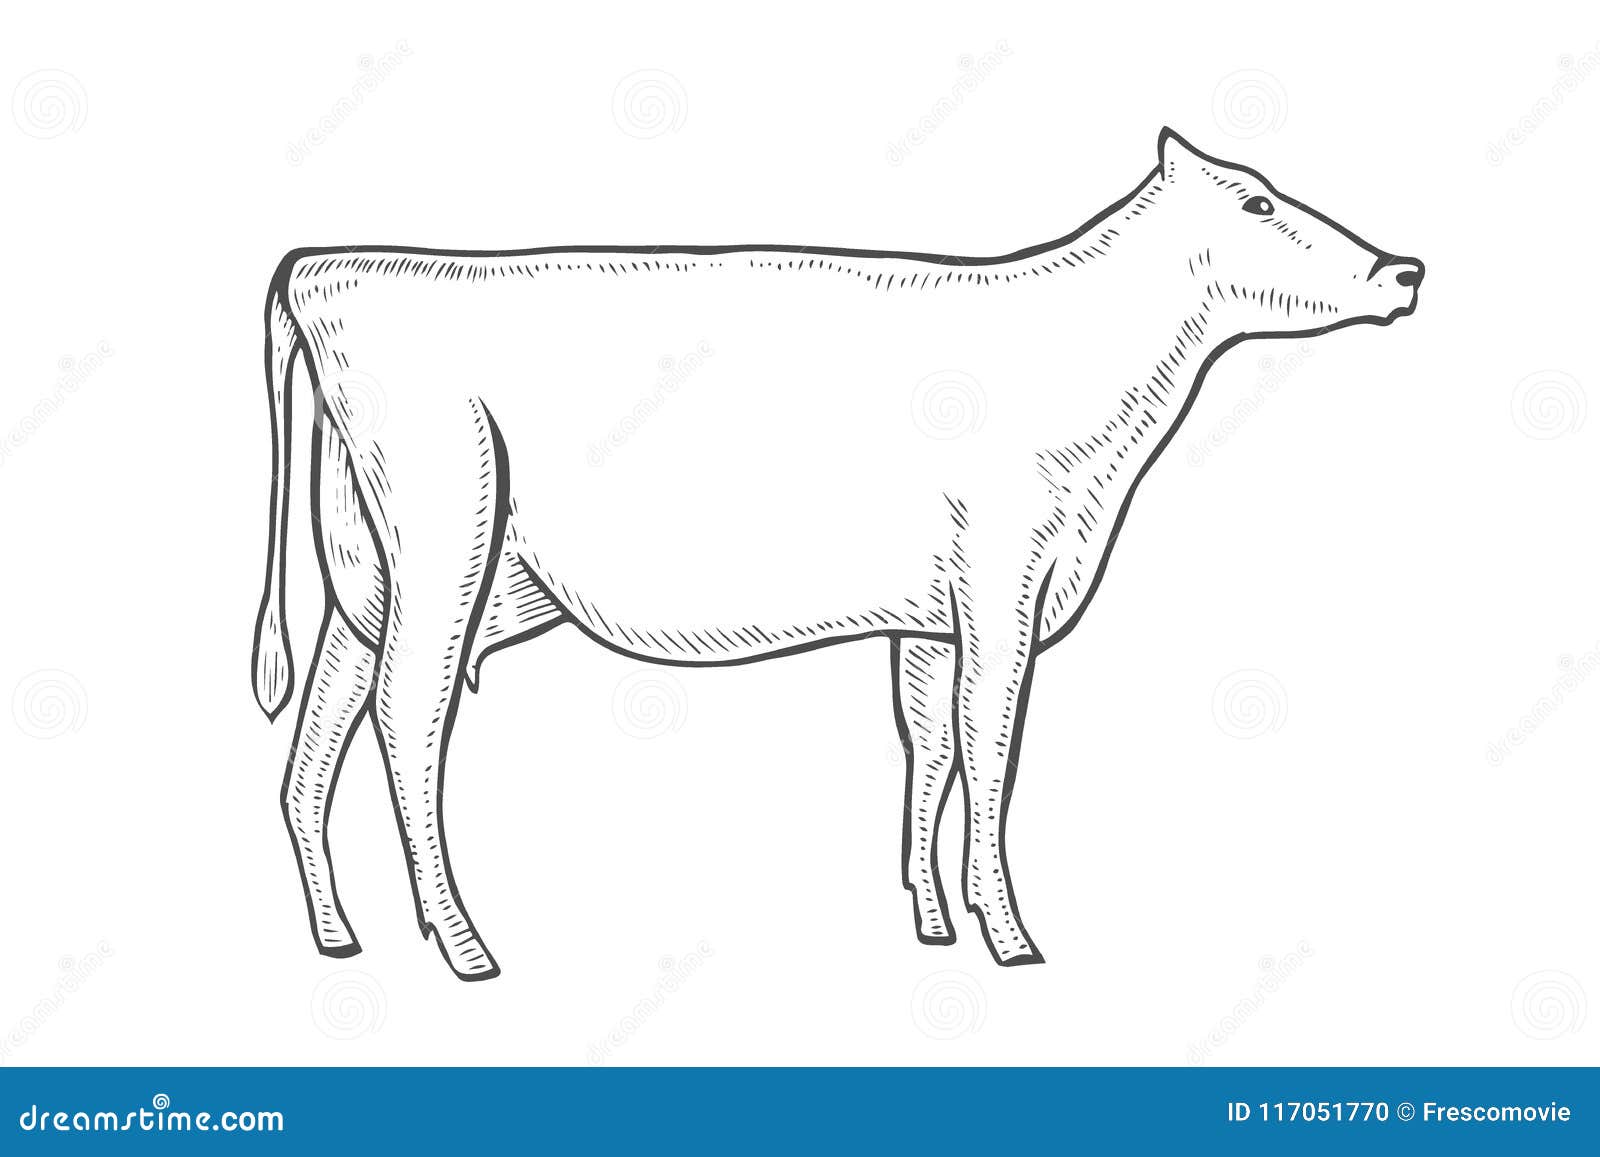 Engrave vector cow stock vector. Illustration of animal - 117051770